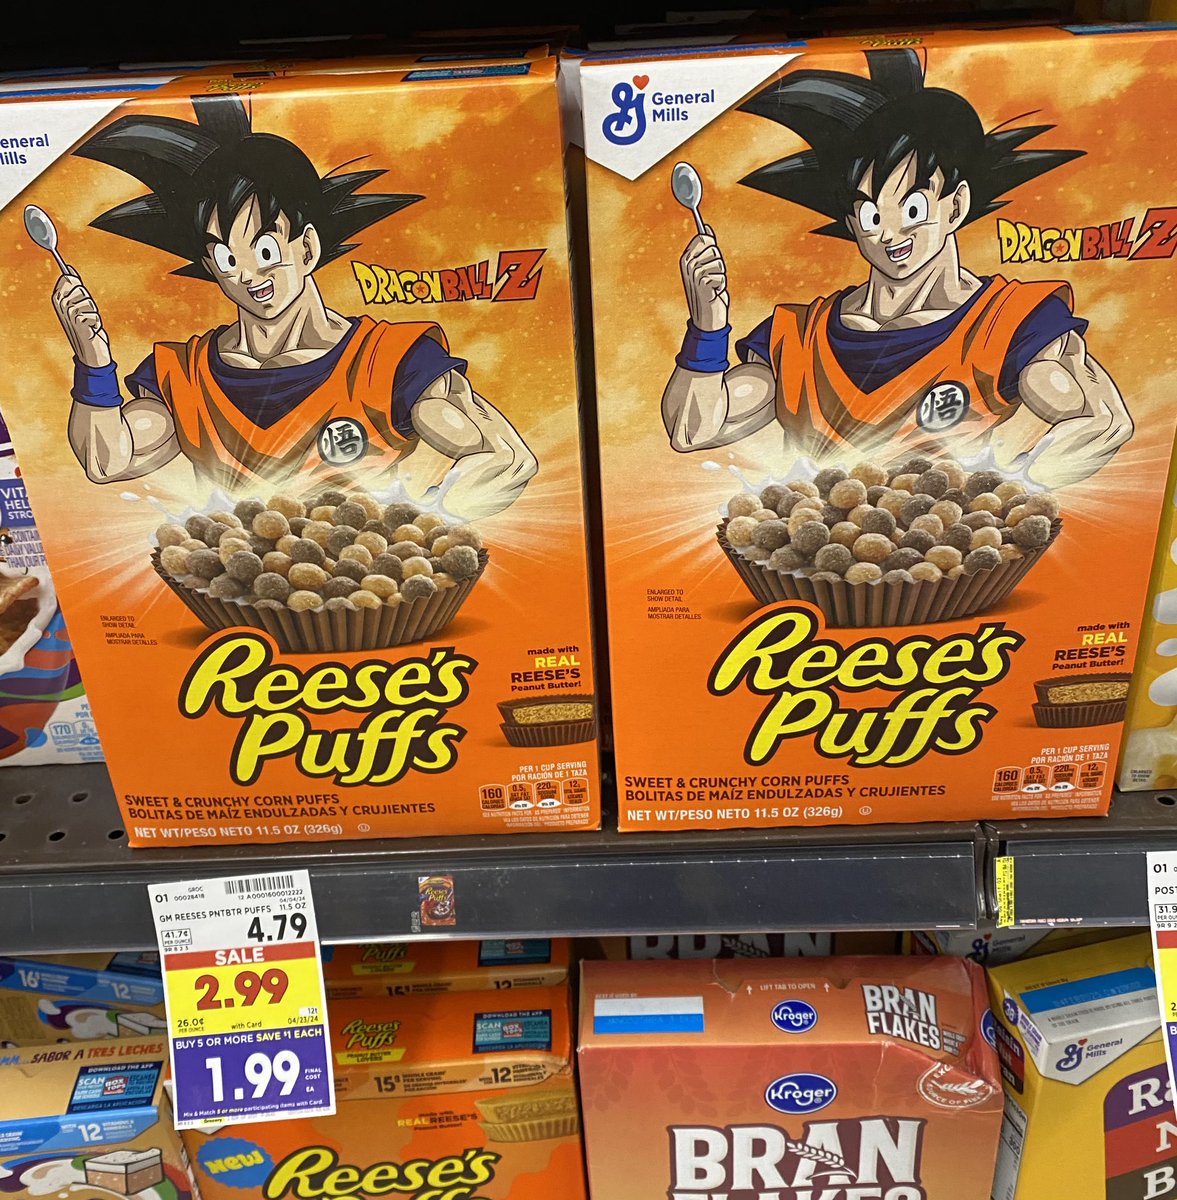 Finding Anime In The Wild: Cereal Aisle Edition. Somehow this just seems like the right and appropriate cereal for Goku to endorse.